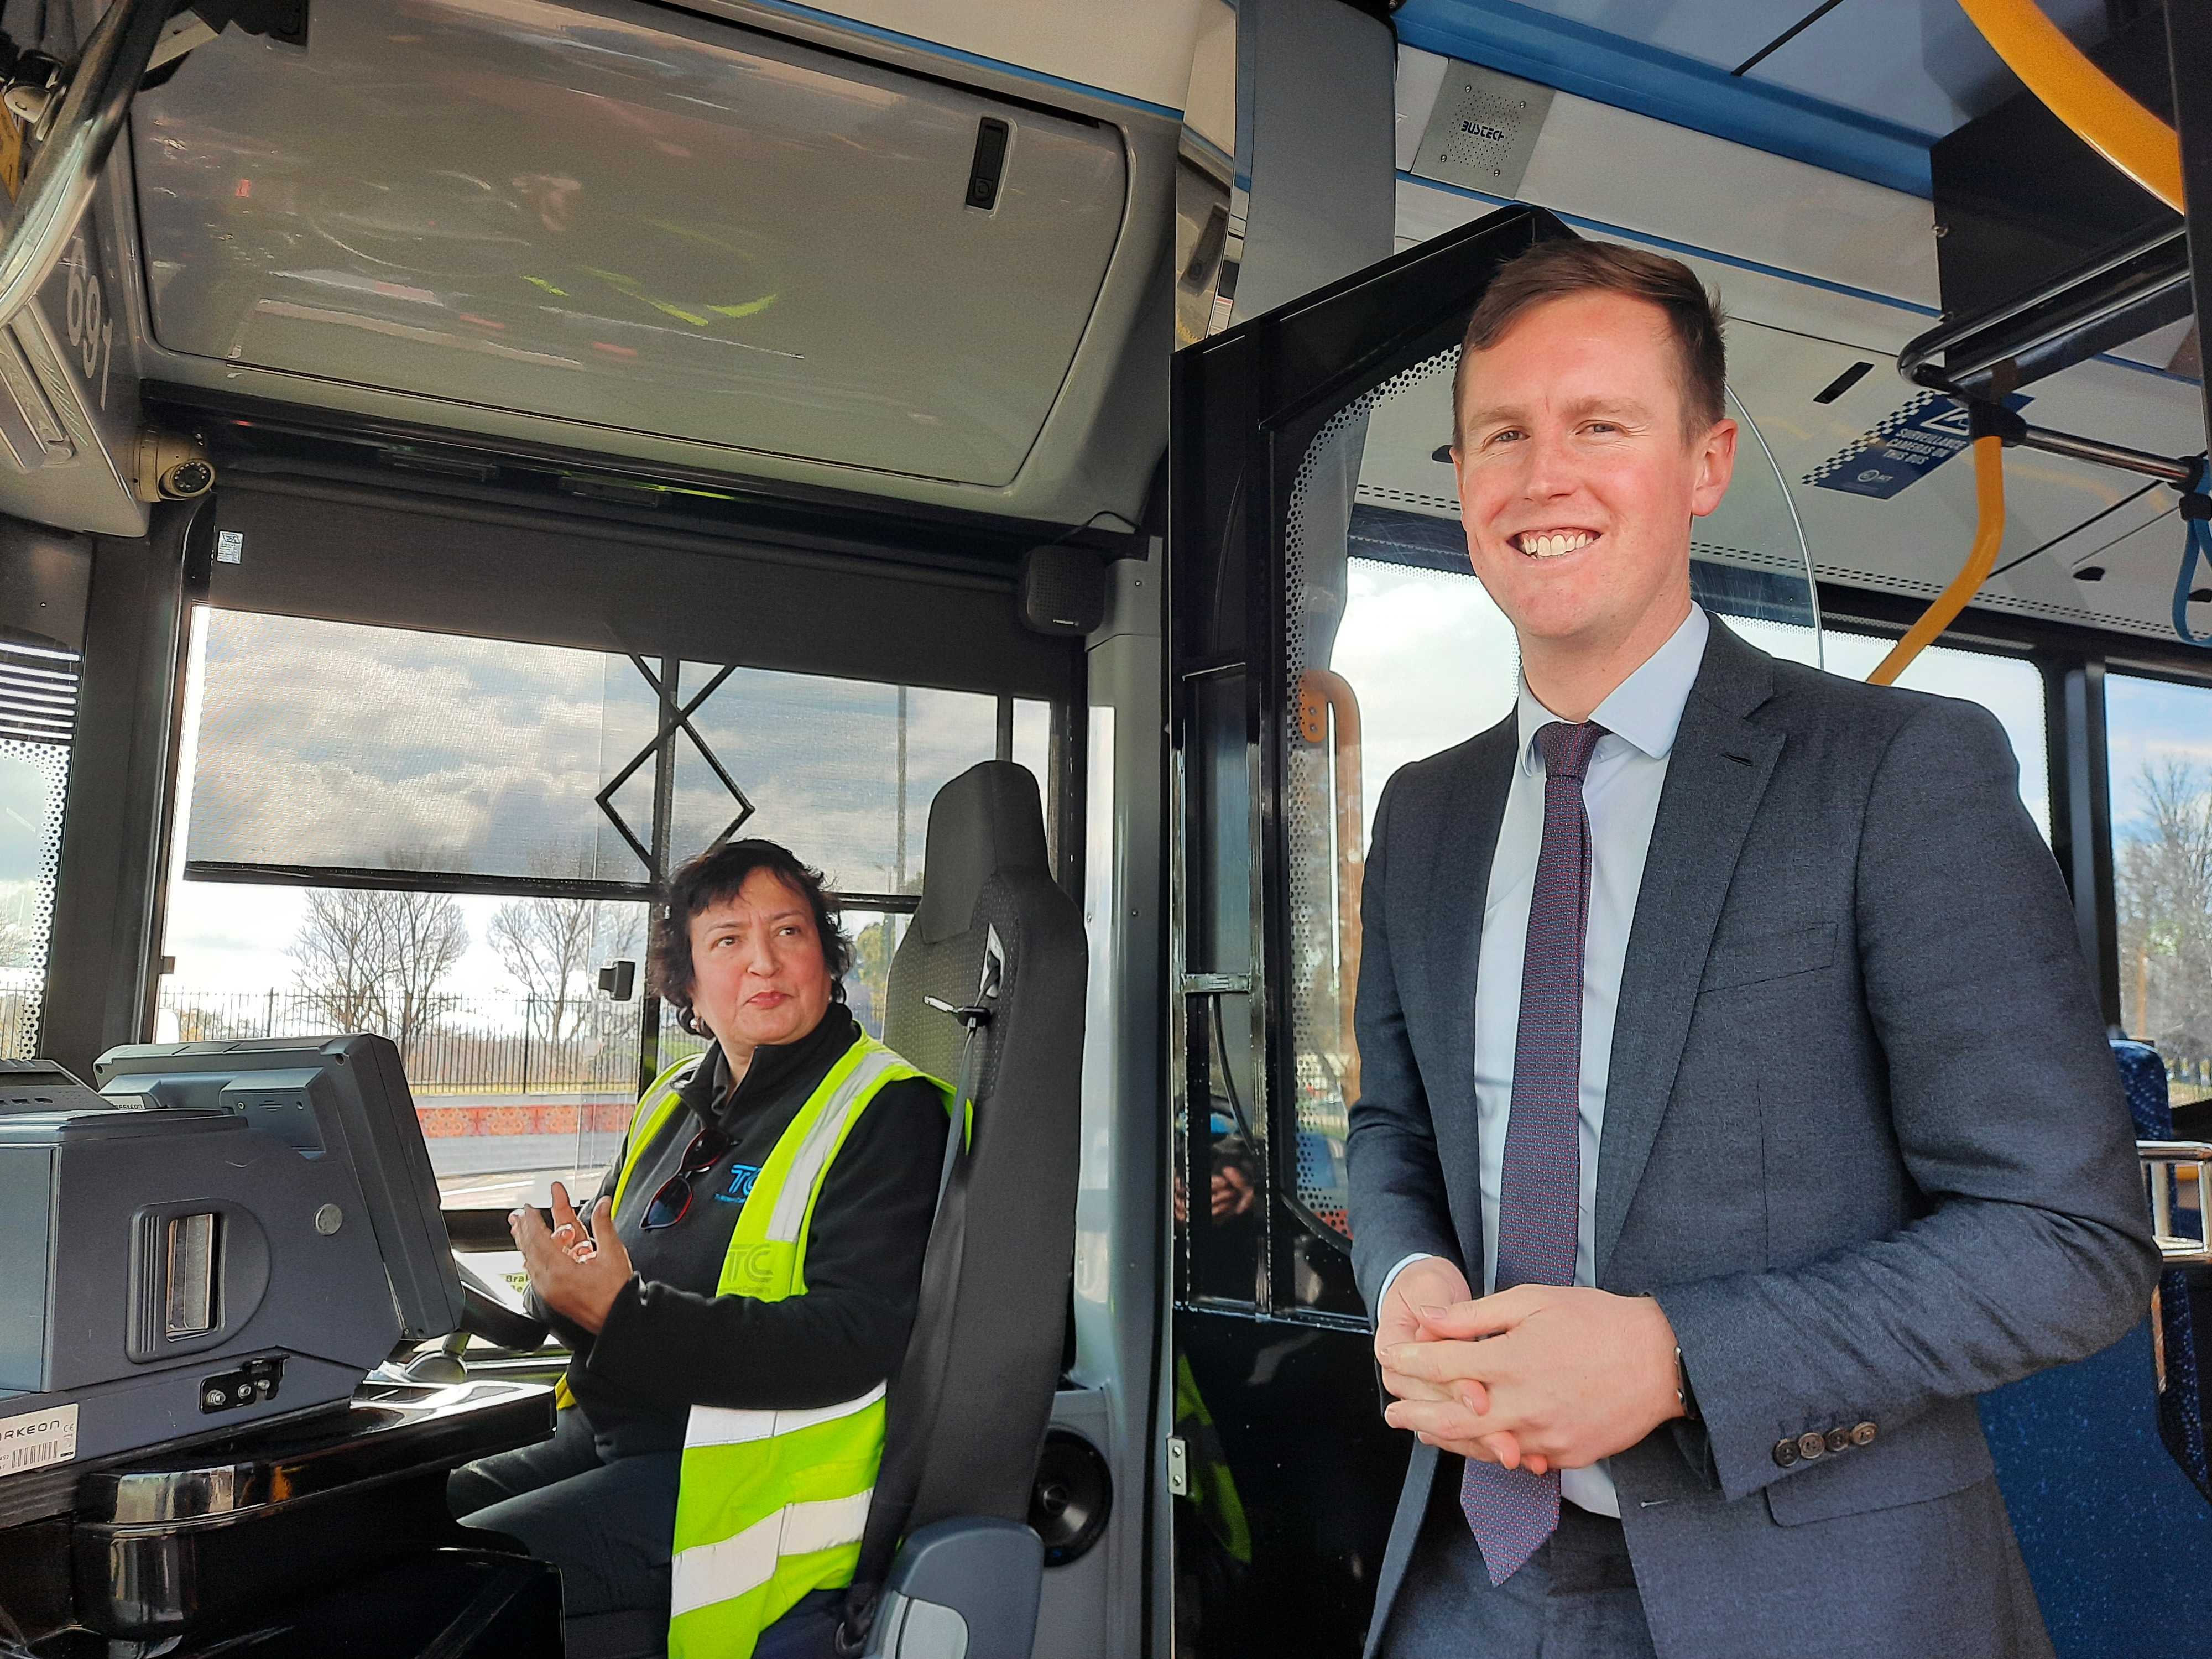 What’s the plan to get Canberra’s bus schedule back to normal?